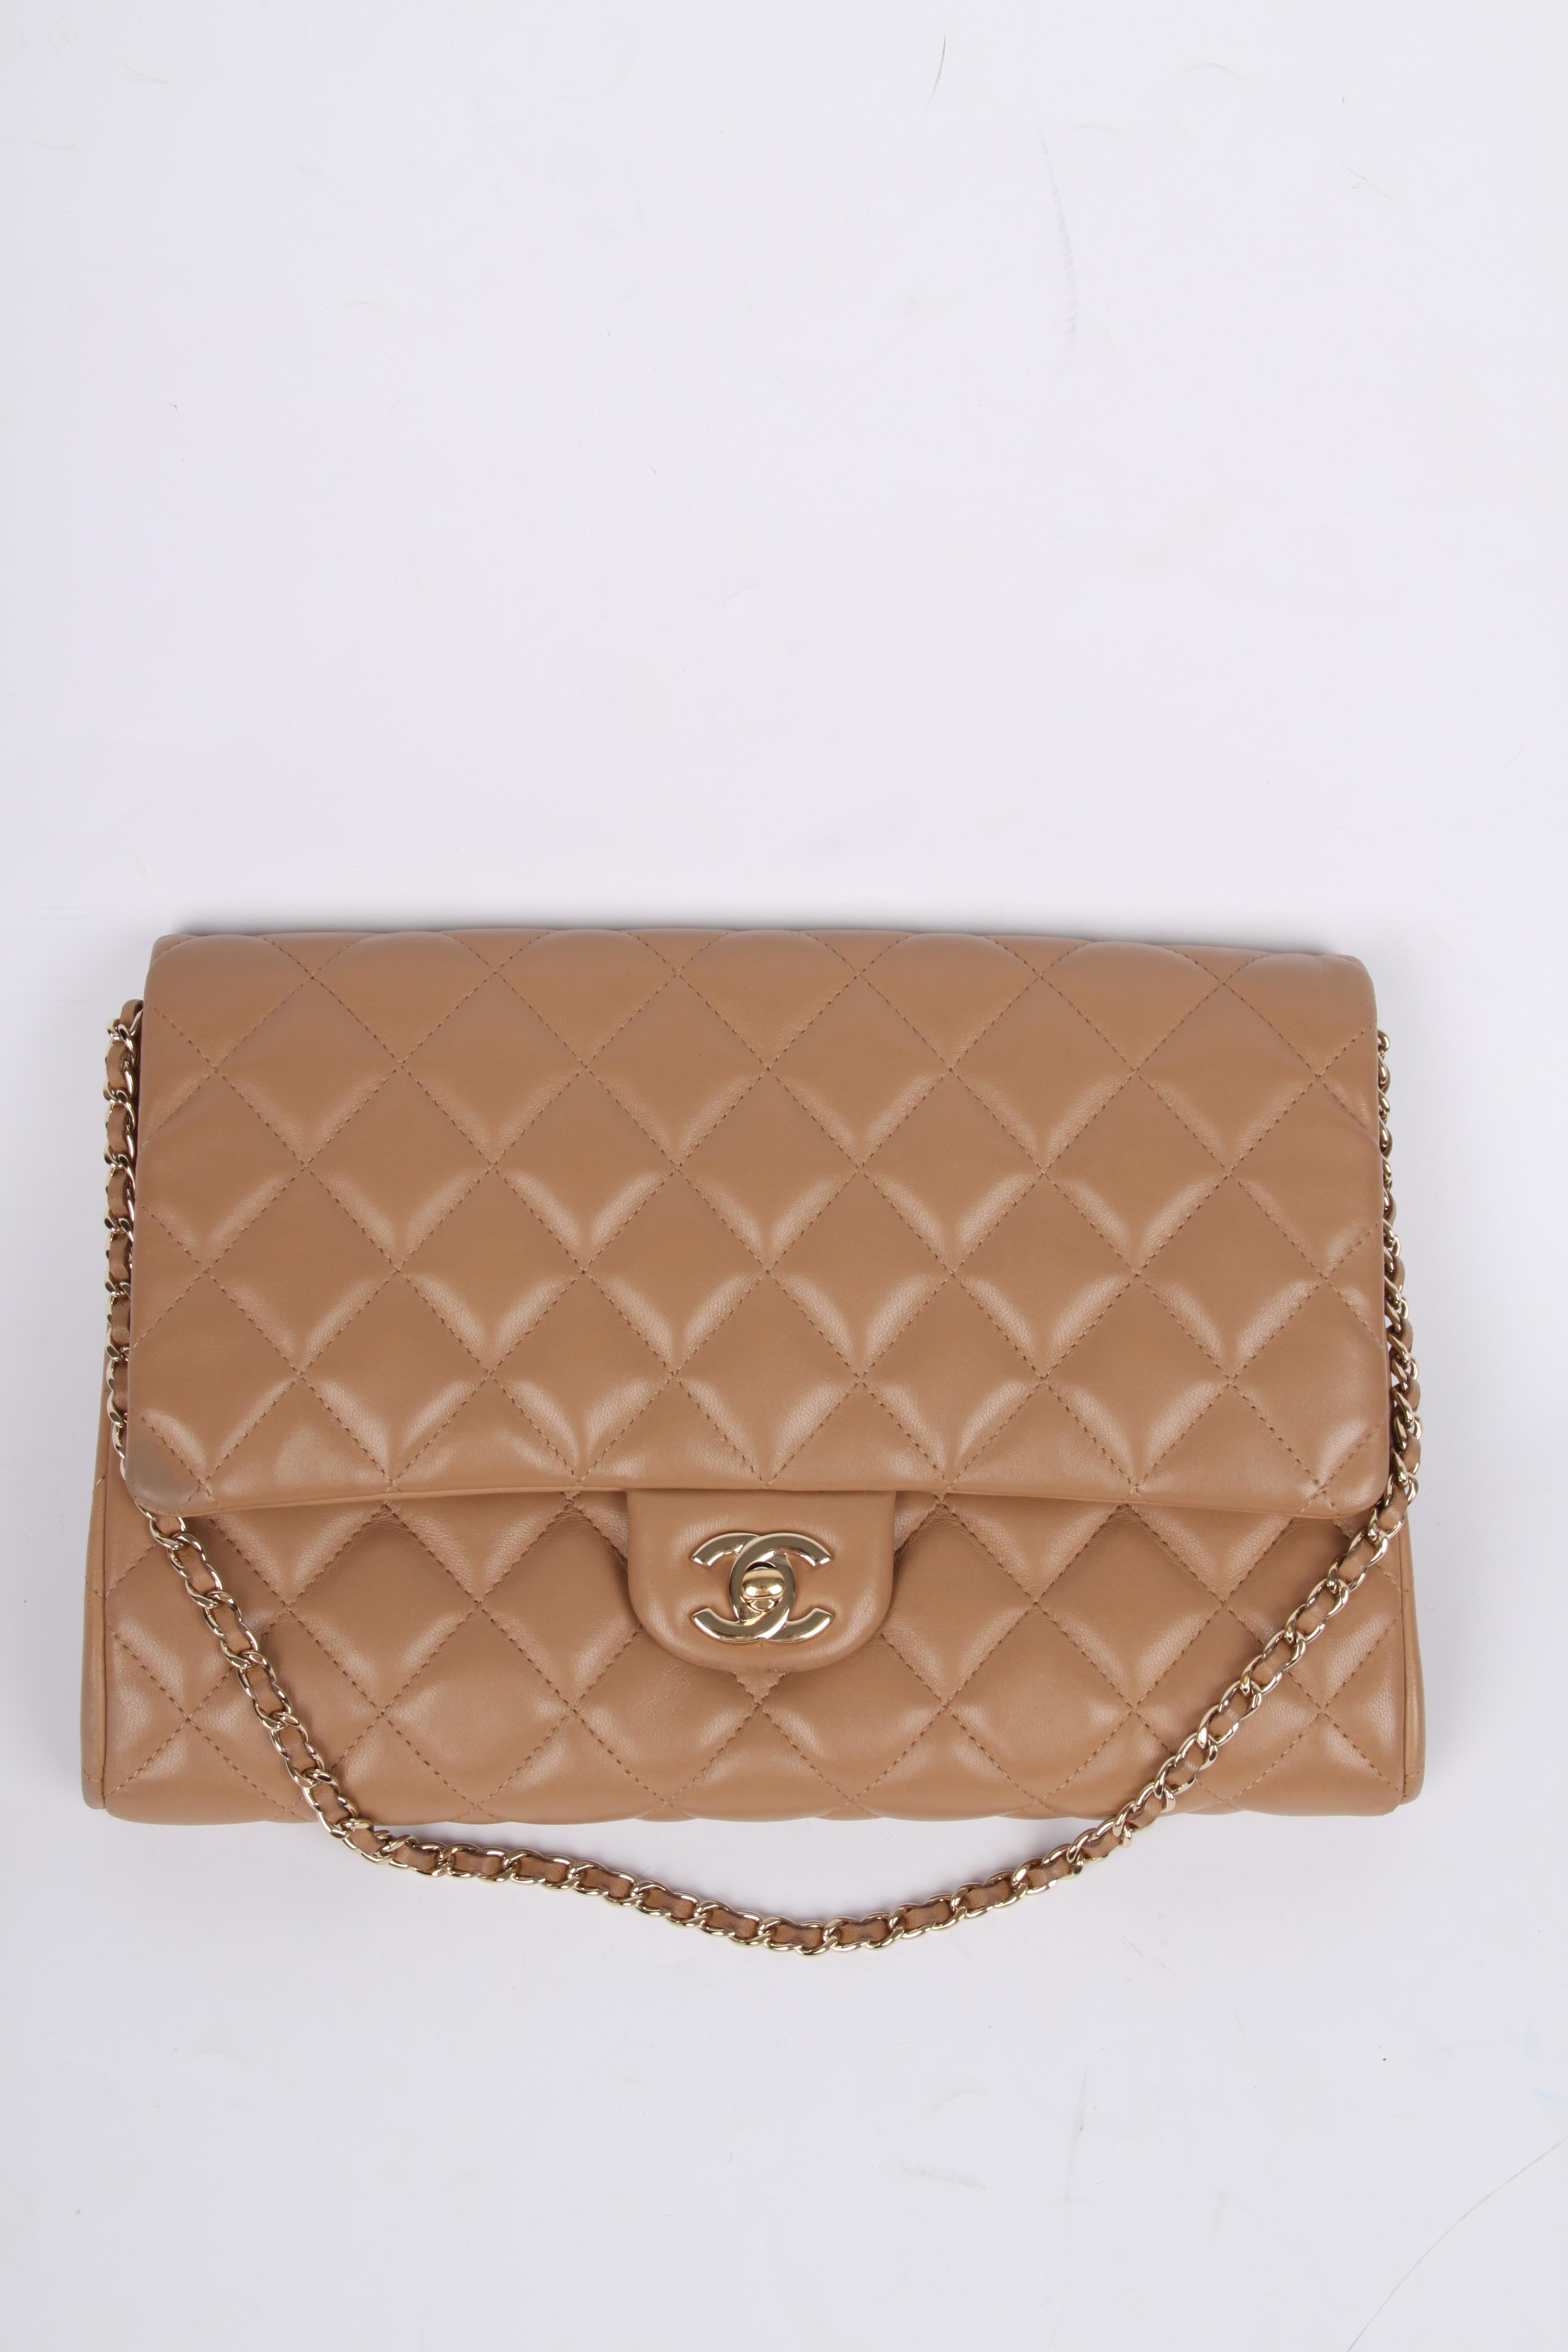 Chanel Quilted Clutch with Chain - beige 5